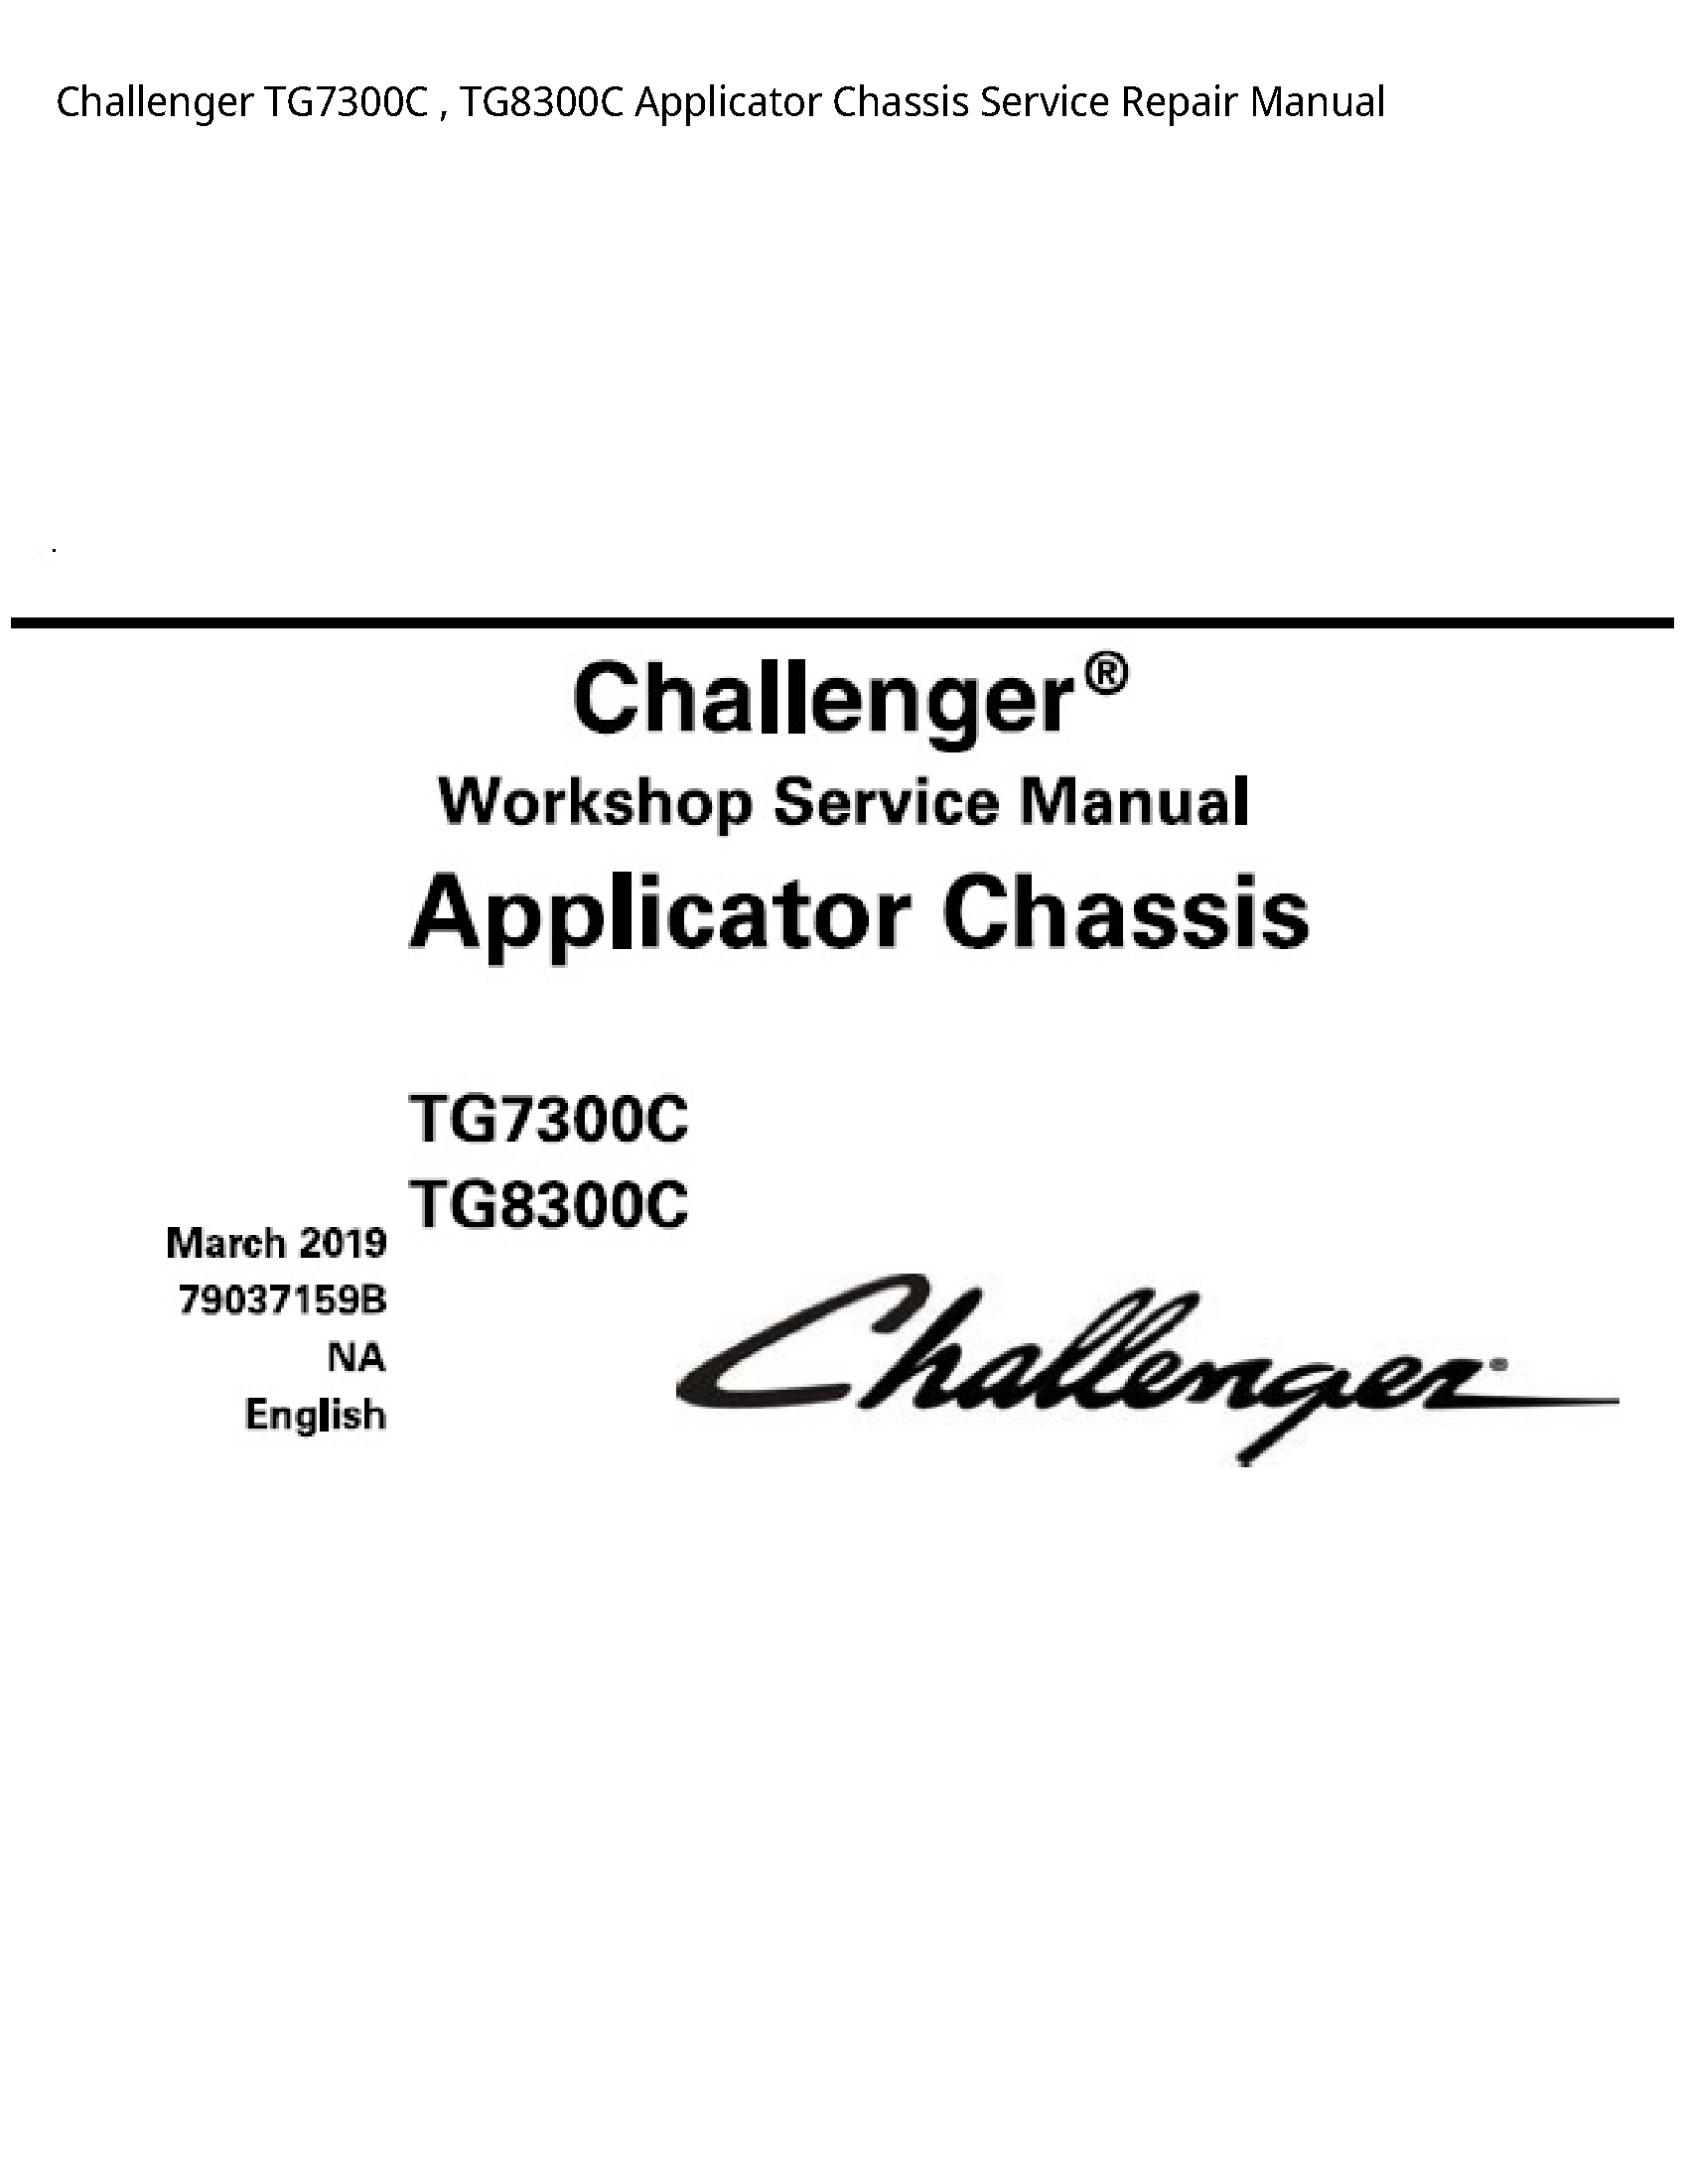 Challenger TG7300C Applicator Chassis manual